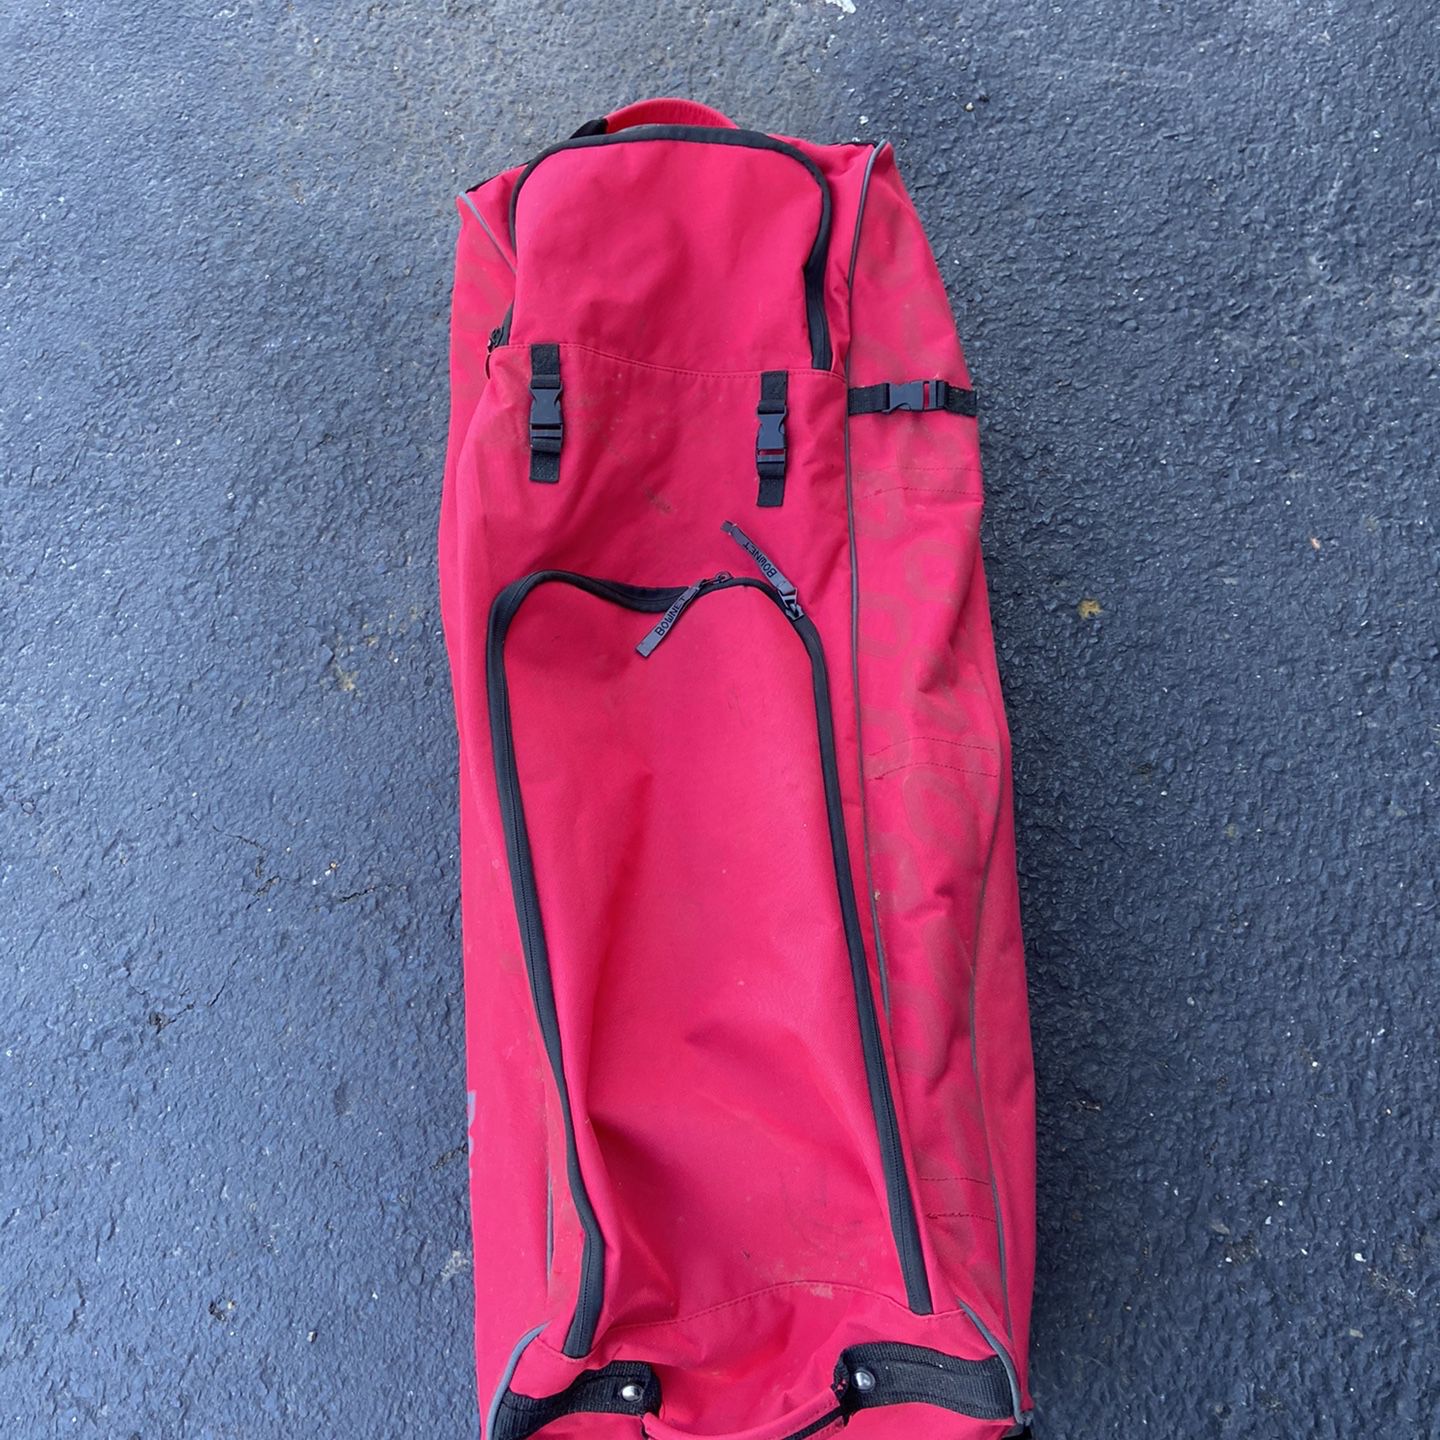 Bownet Catchers Bag (Red)